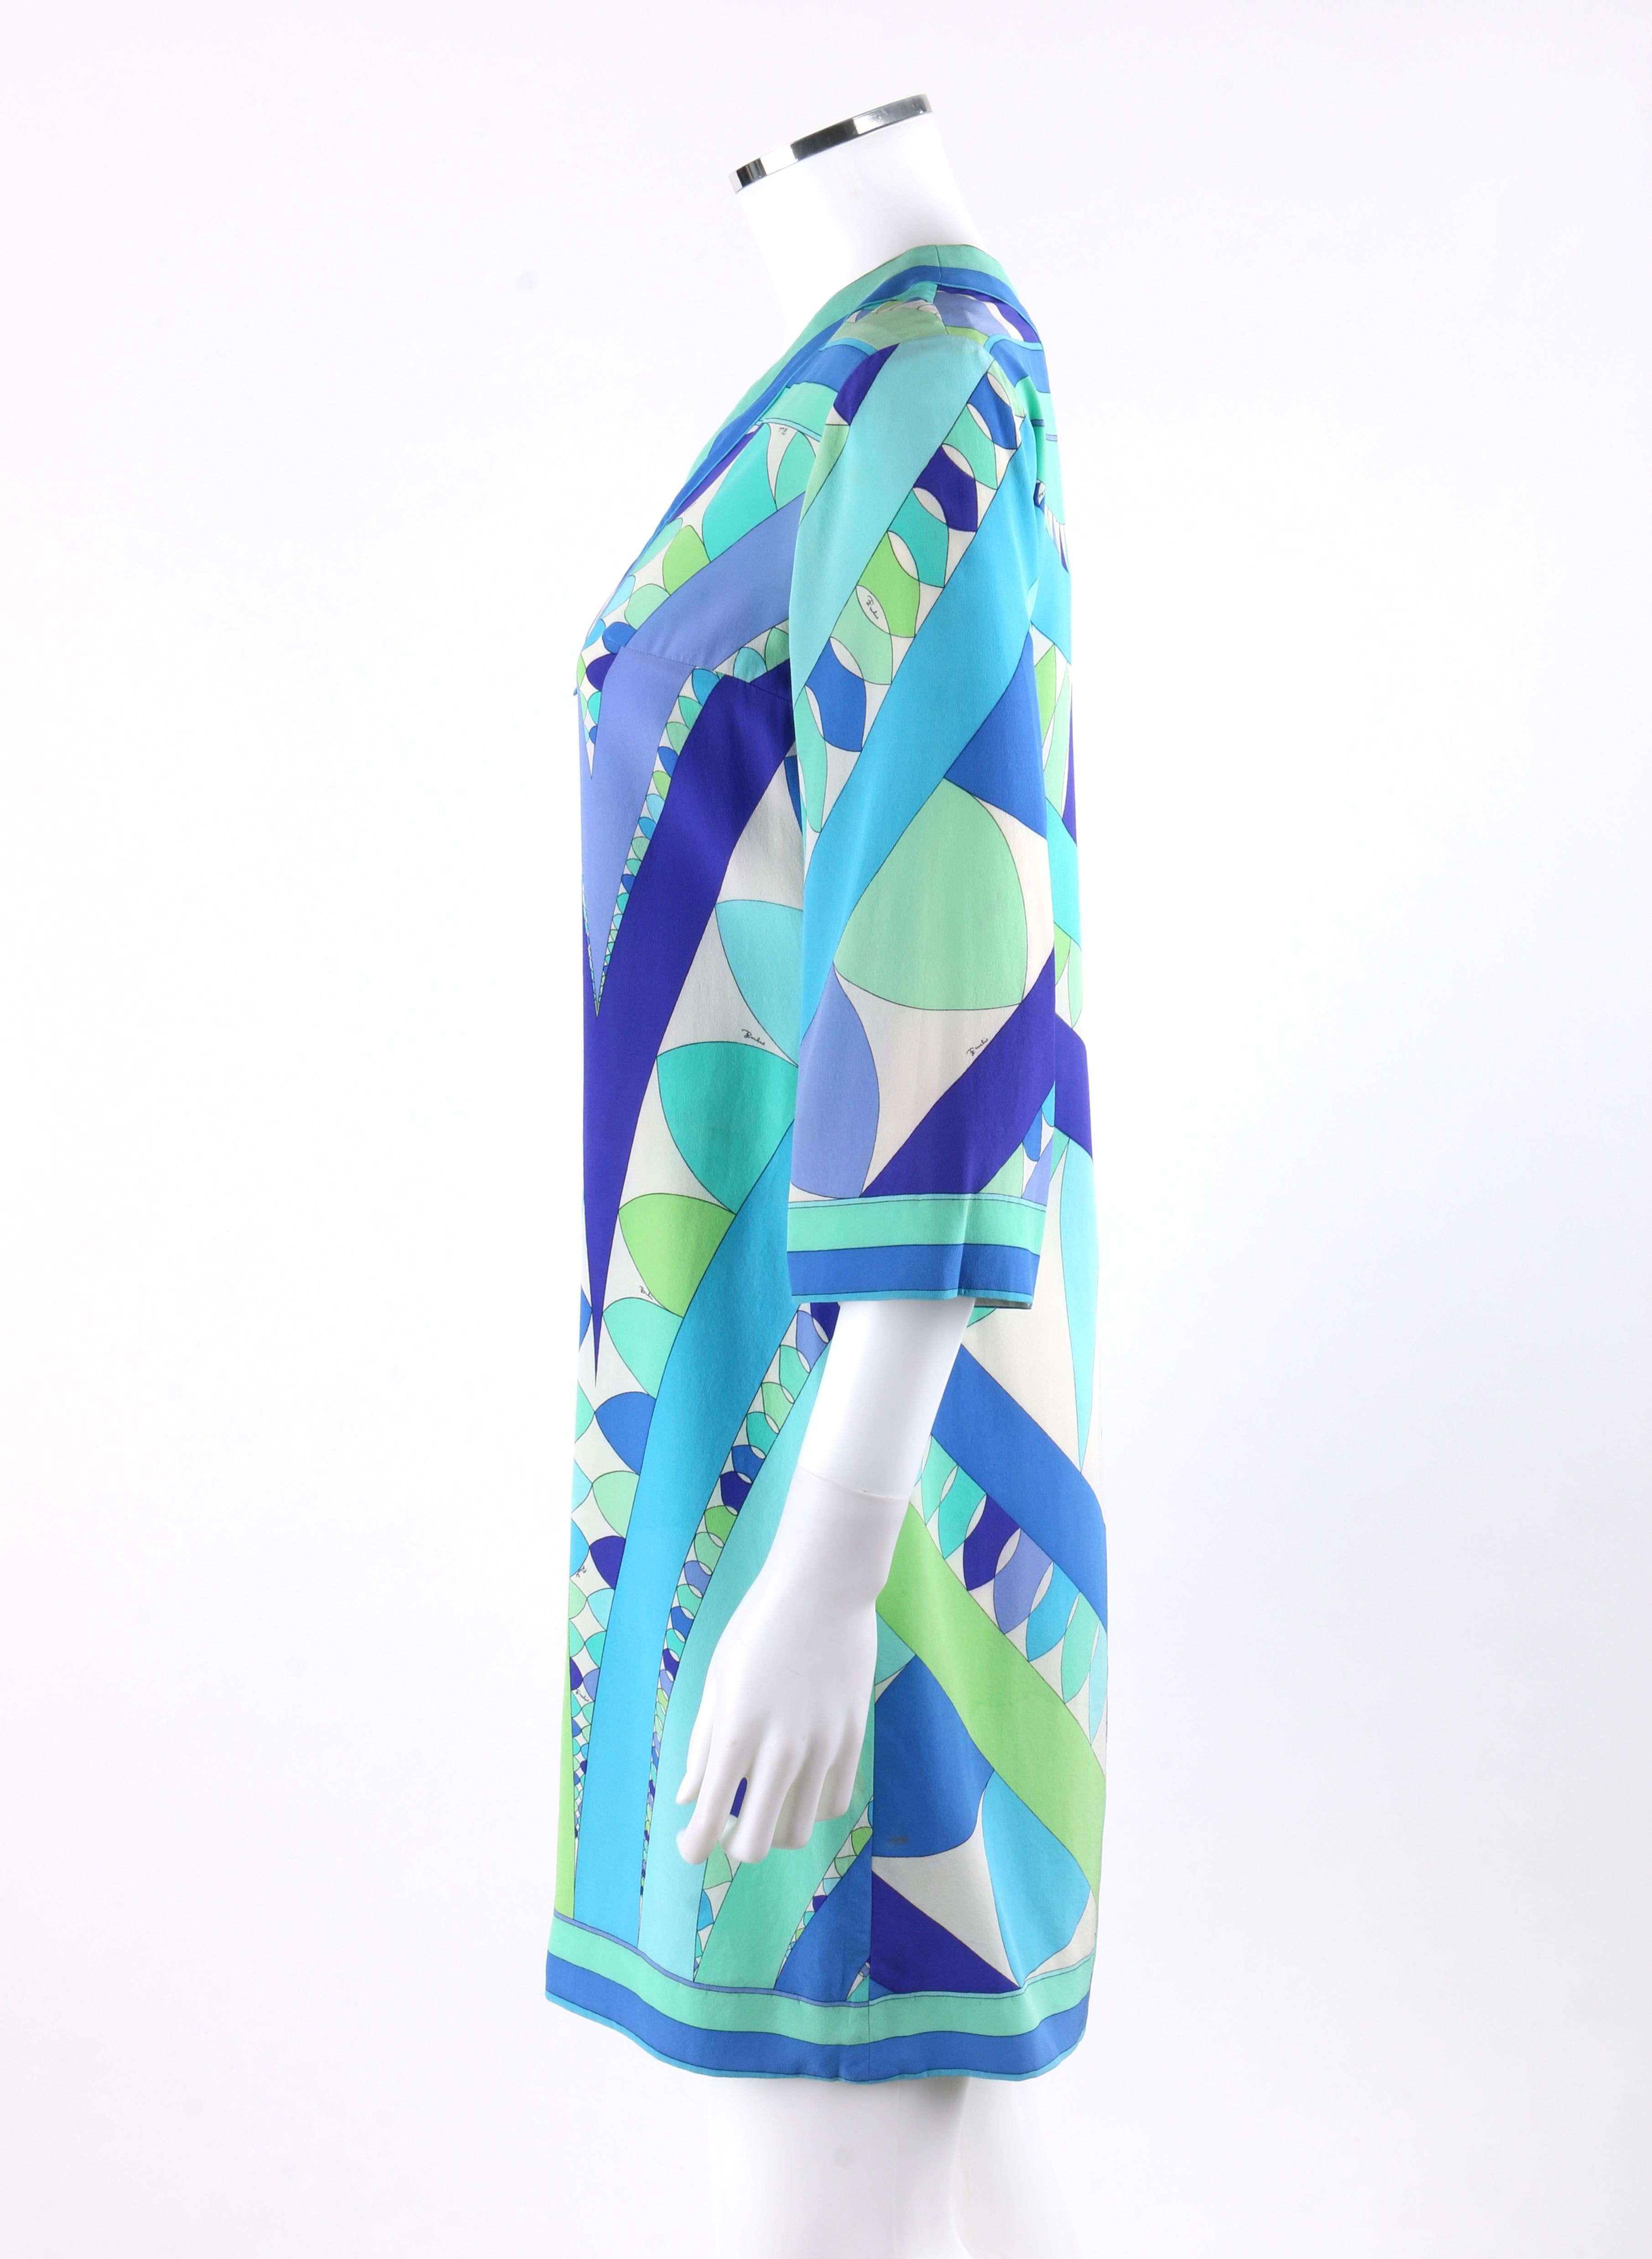 EMILIO PUCCI c.1960’s Blue Green Geometric Signature Print Shift Dress In Good Condition For Sale In Thiensville, WI